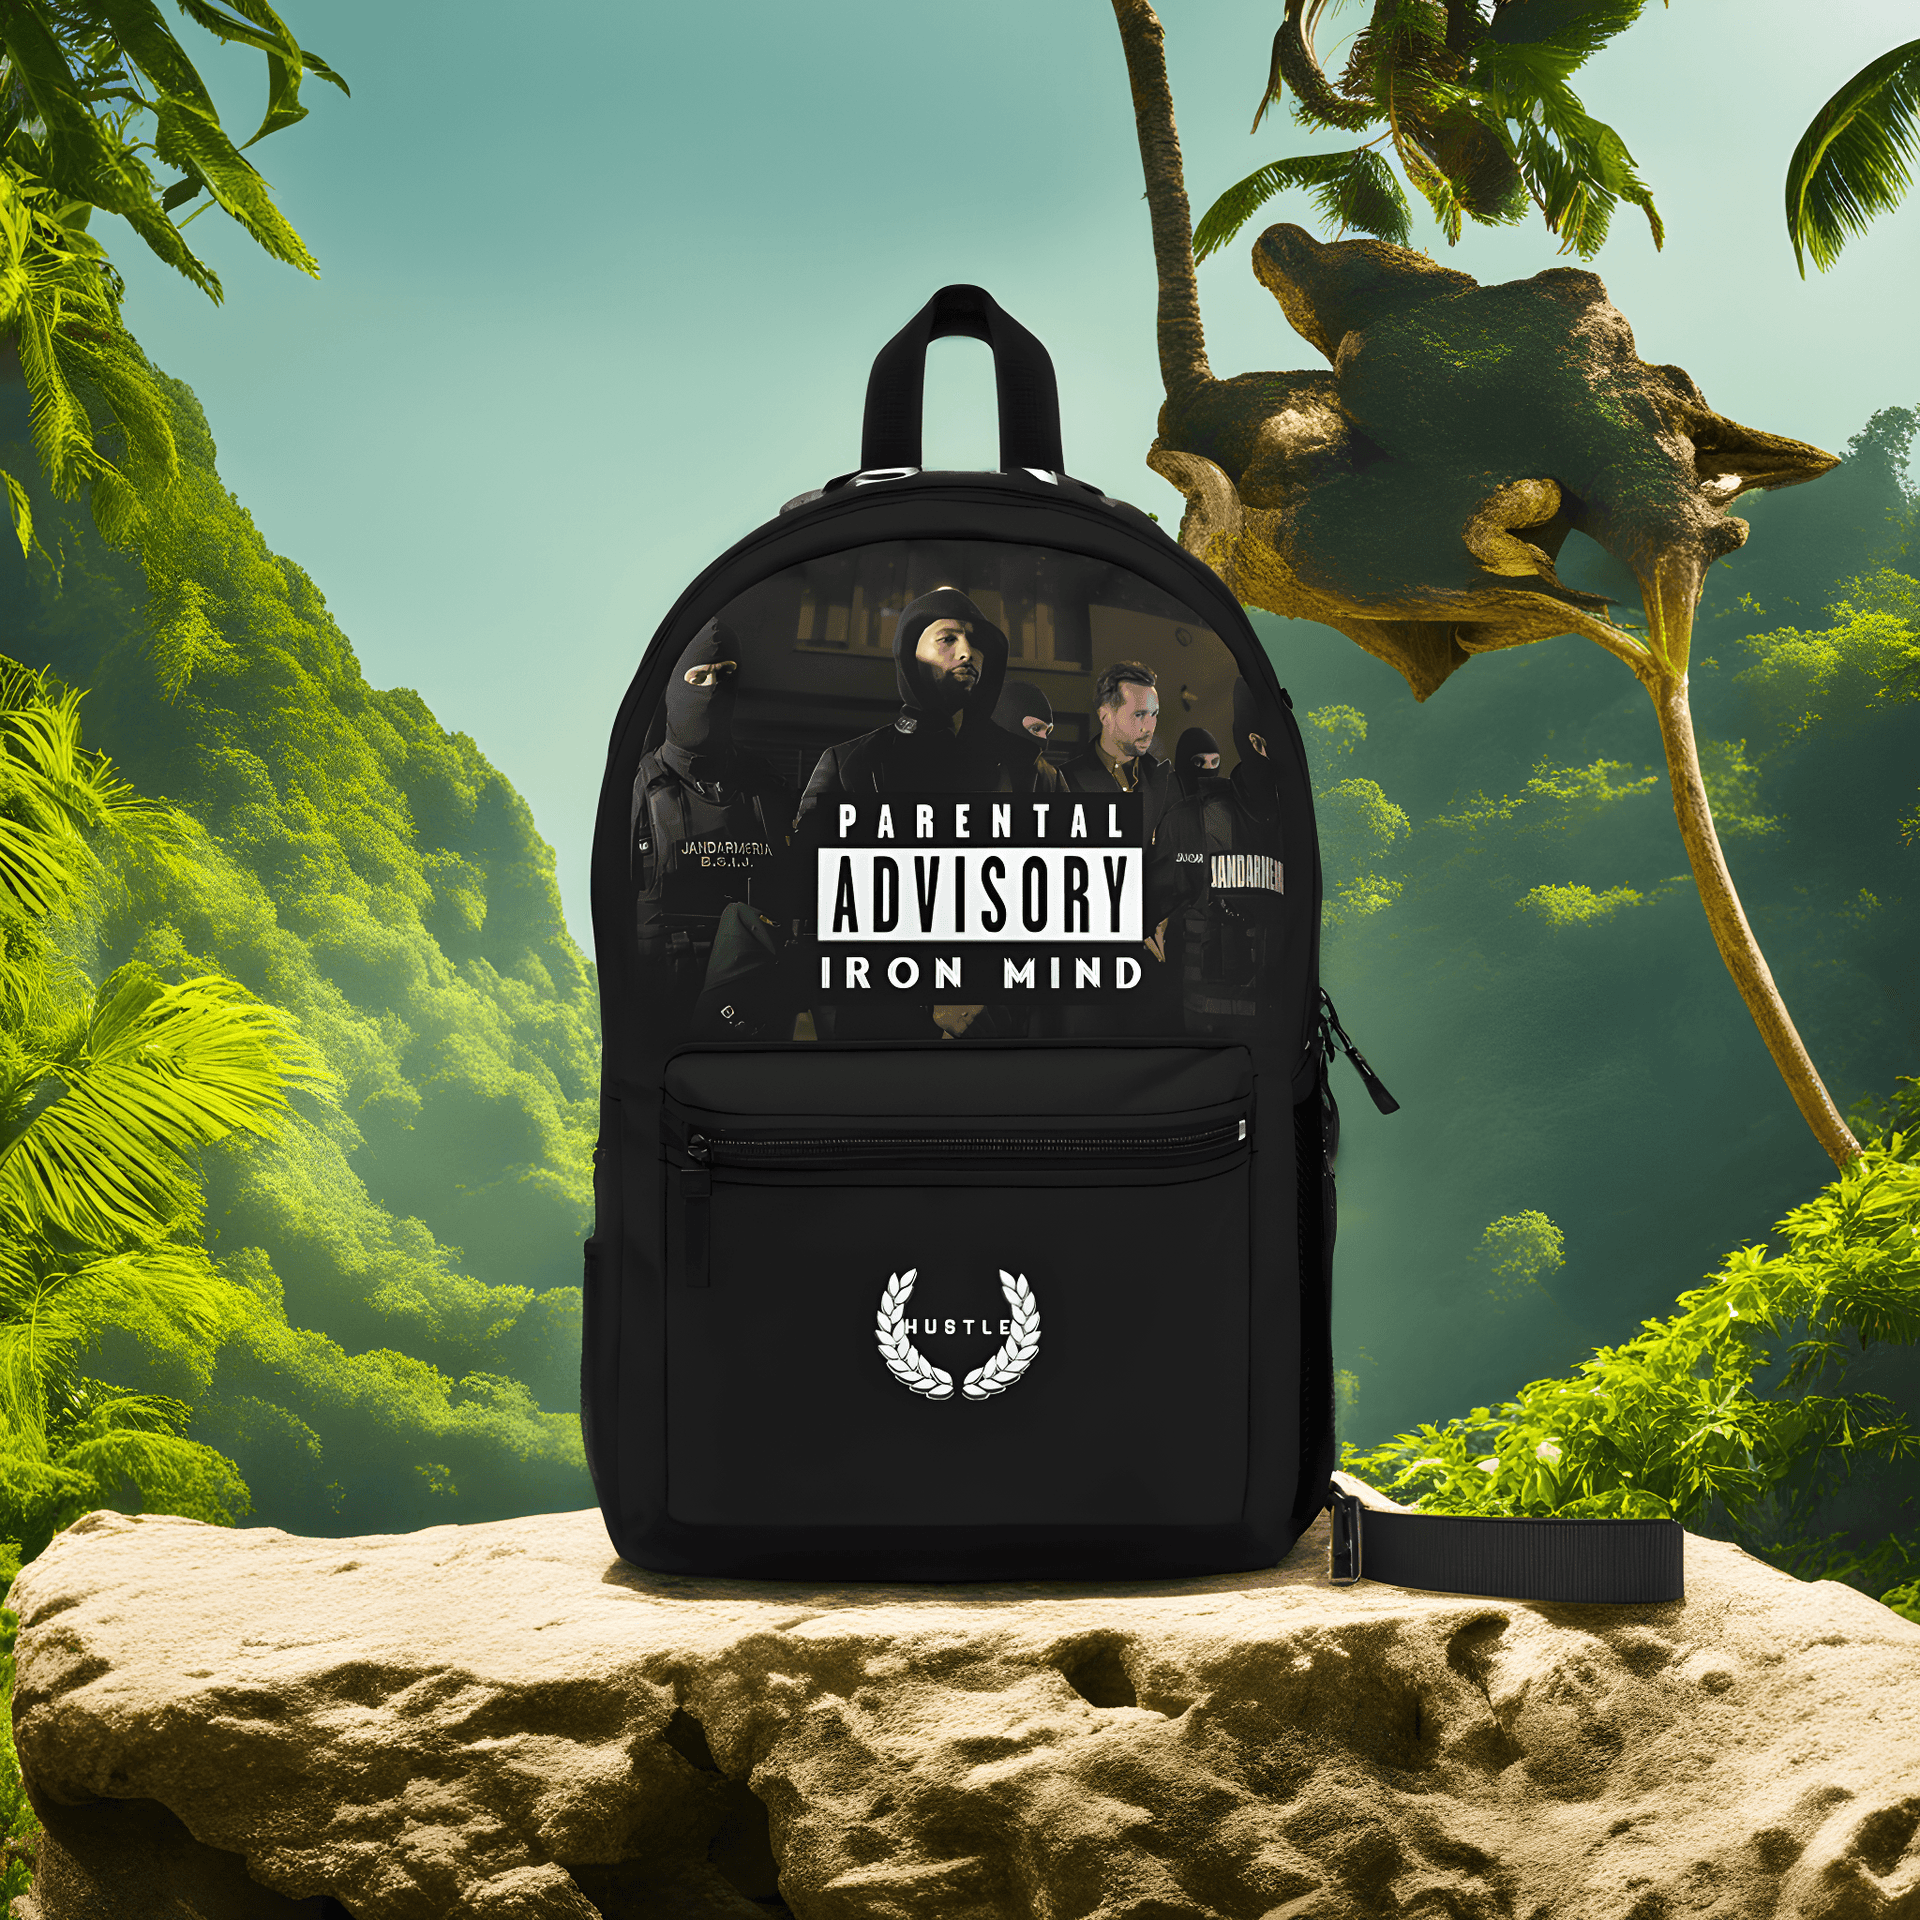 Andrew Tate Backpack | Merch | Hustler's Inventory featuring "Iron Mind" Quote | Shop Now!